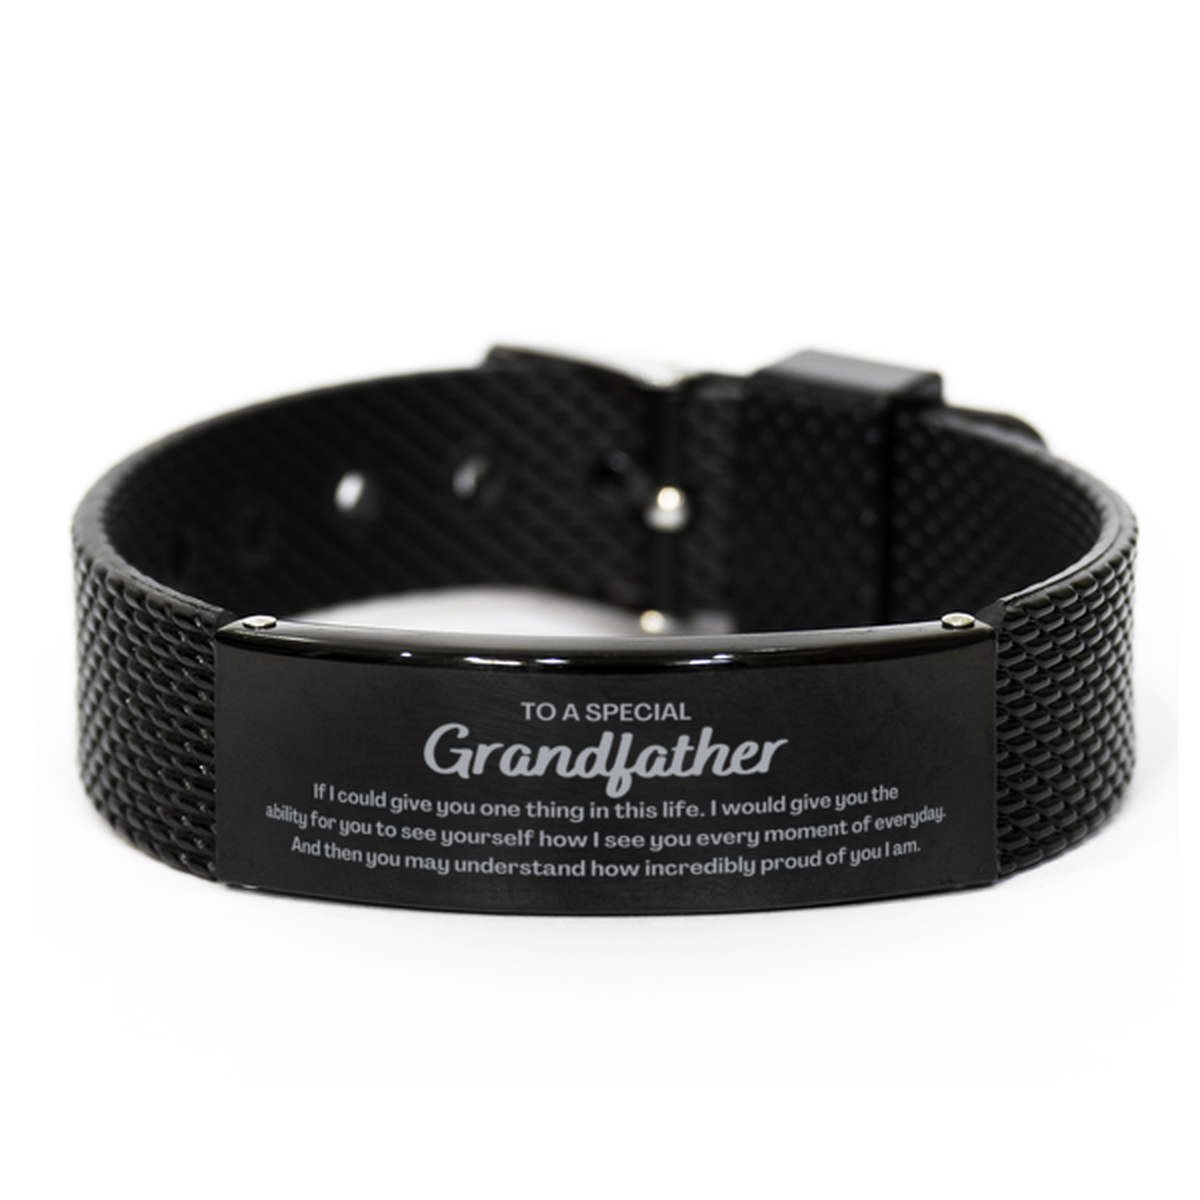 To My Grandfather Black Shark Mesh Bracelet, Gifts For Grandfather Engraved, Inspirational Gifts for Christmas Birthday, Epic Gifts for Grandfather To A Special Grandfather how incredibly proud of you I am